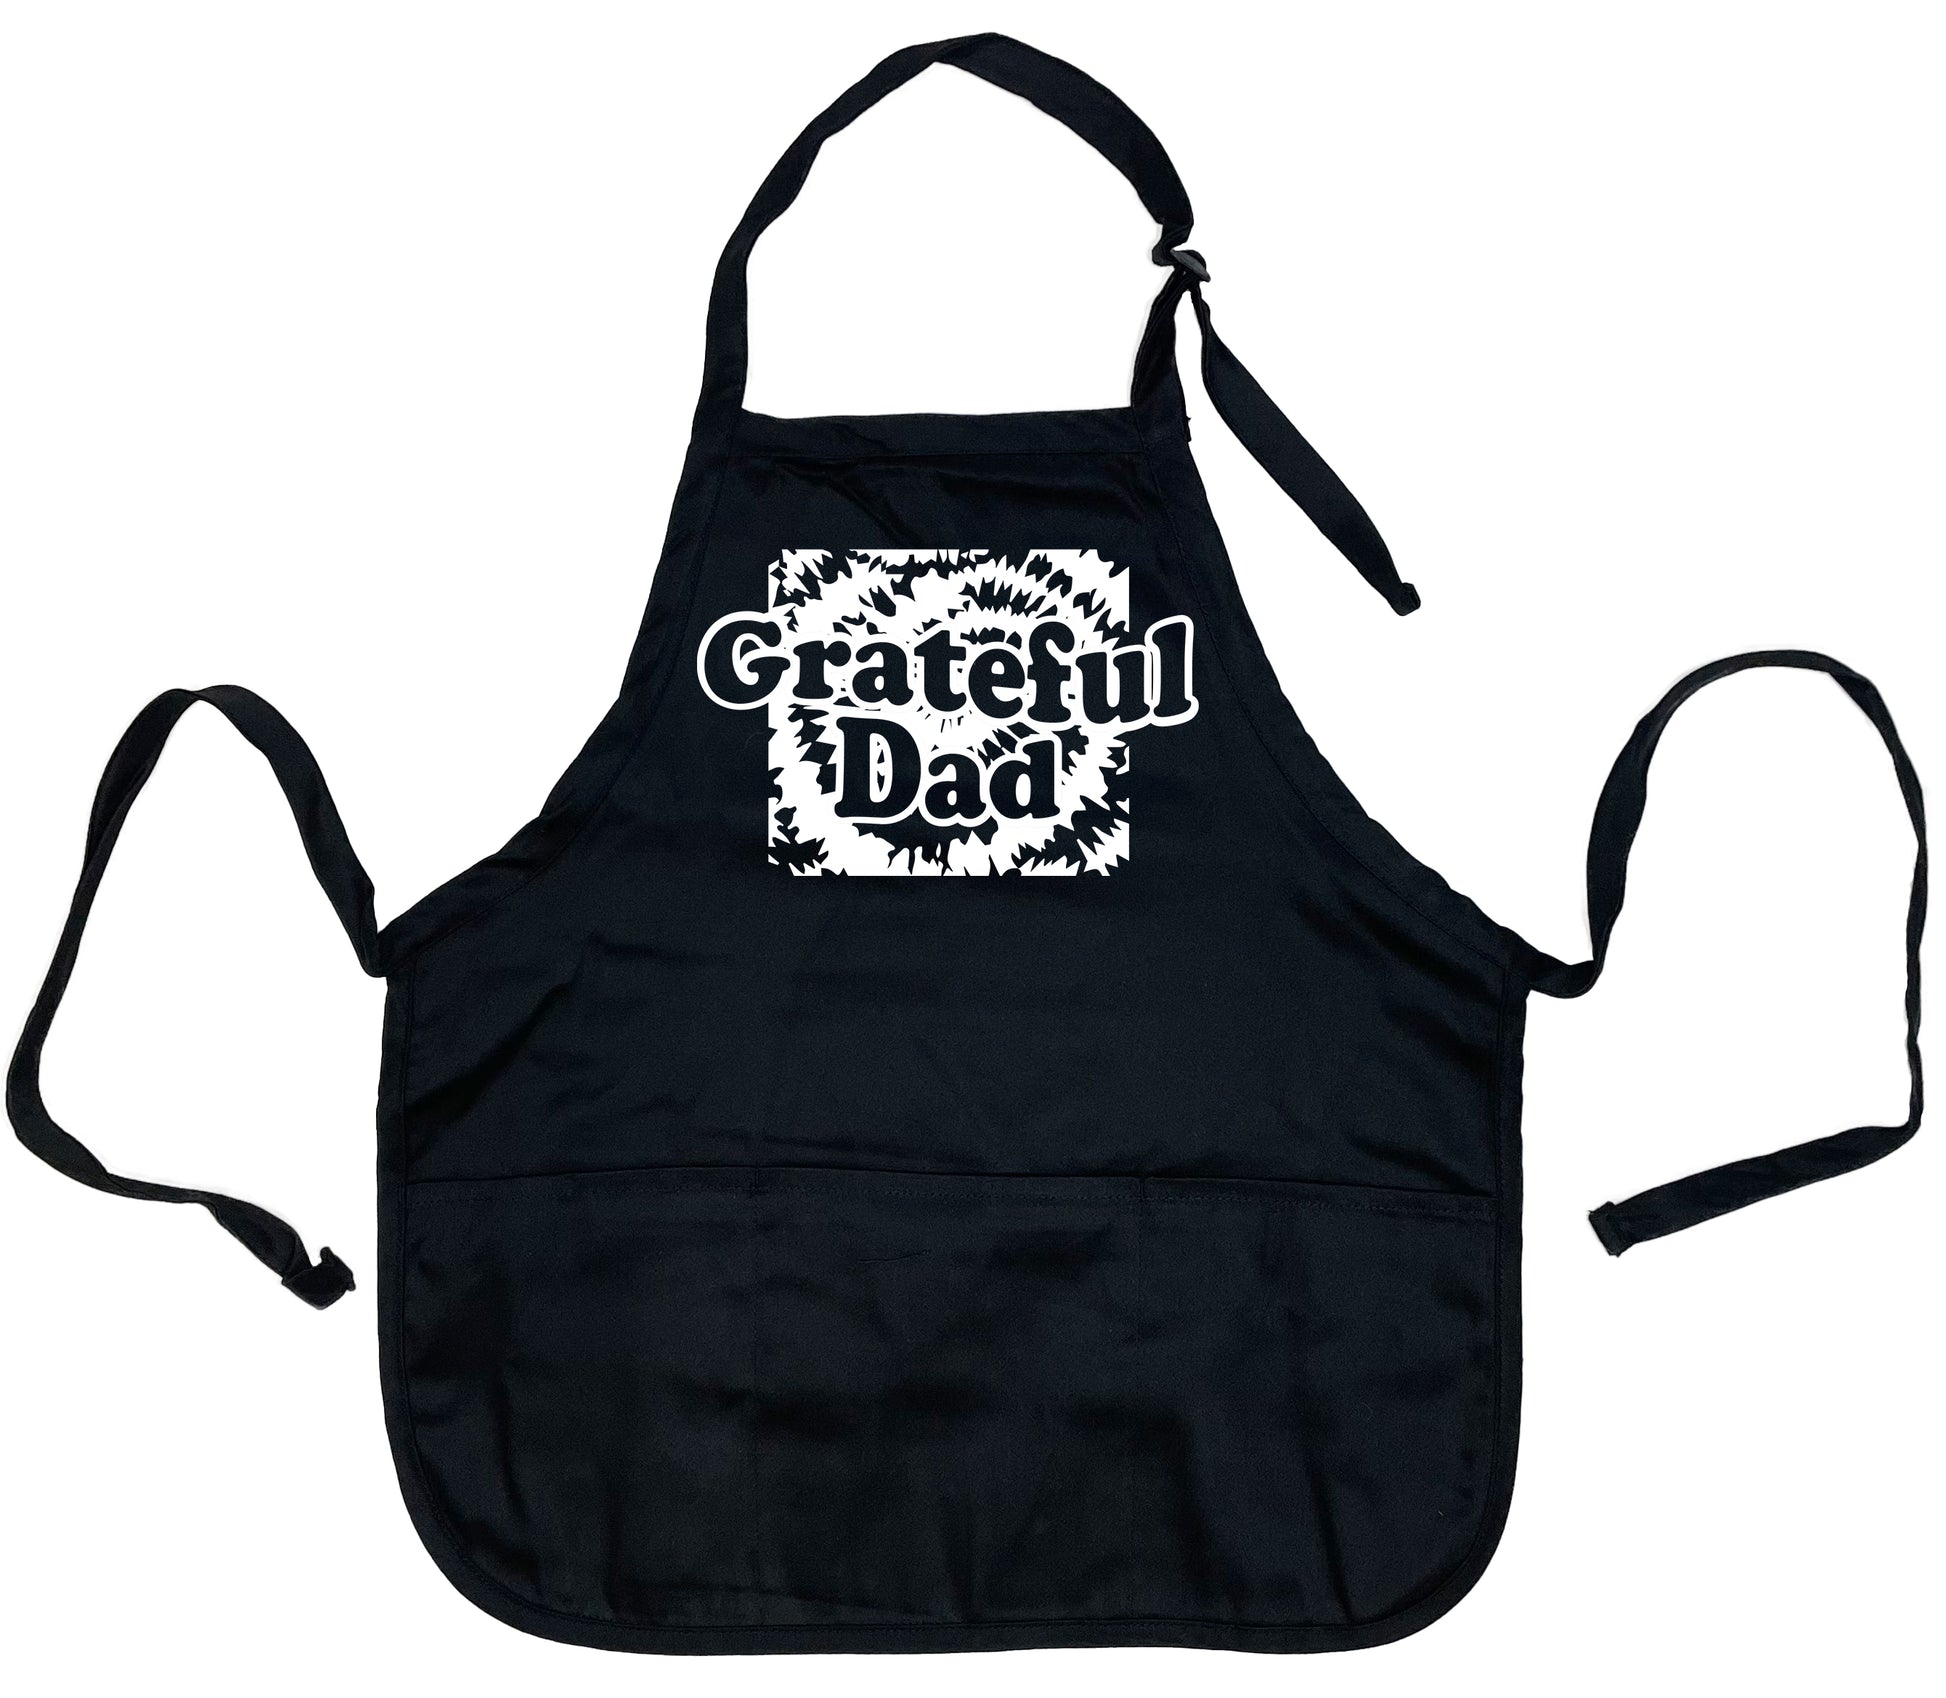 Grateful Dad Apron - Funny T Shirts & Graphic Tees